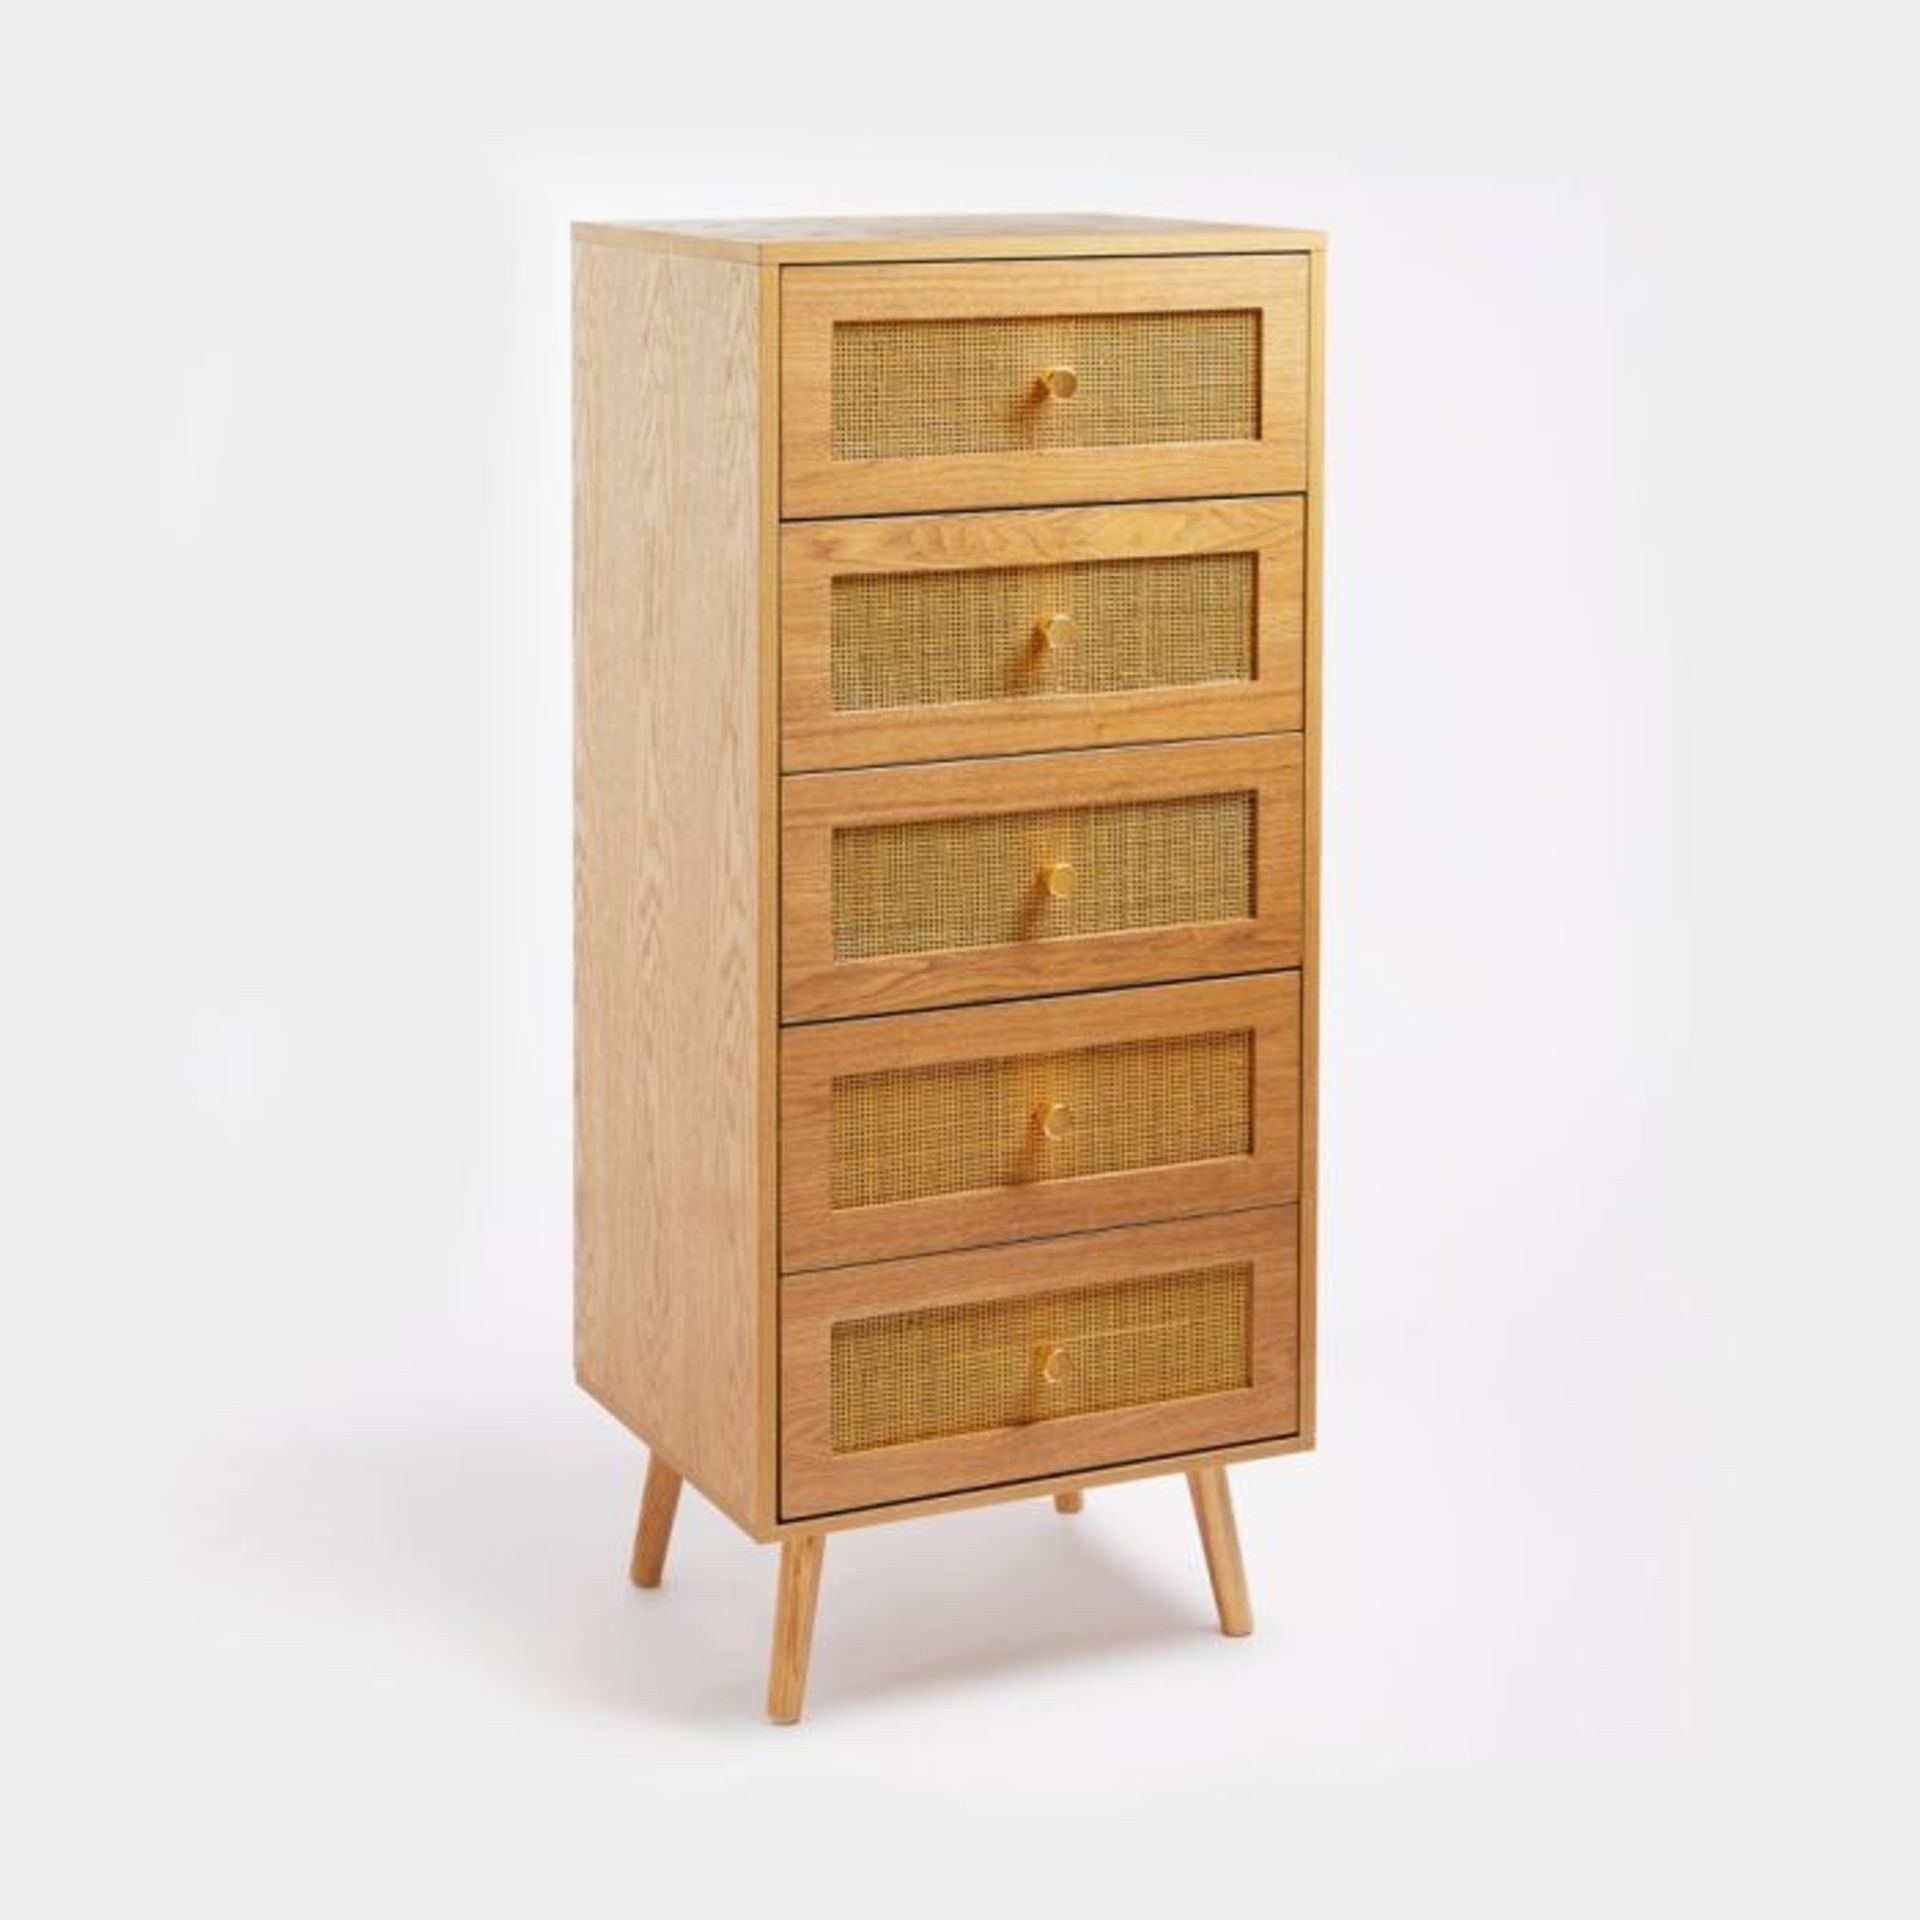 5 Drawer Rattan Tall Chest of Drawers - ER29